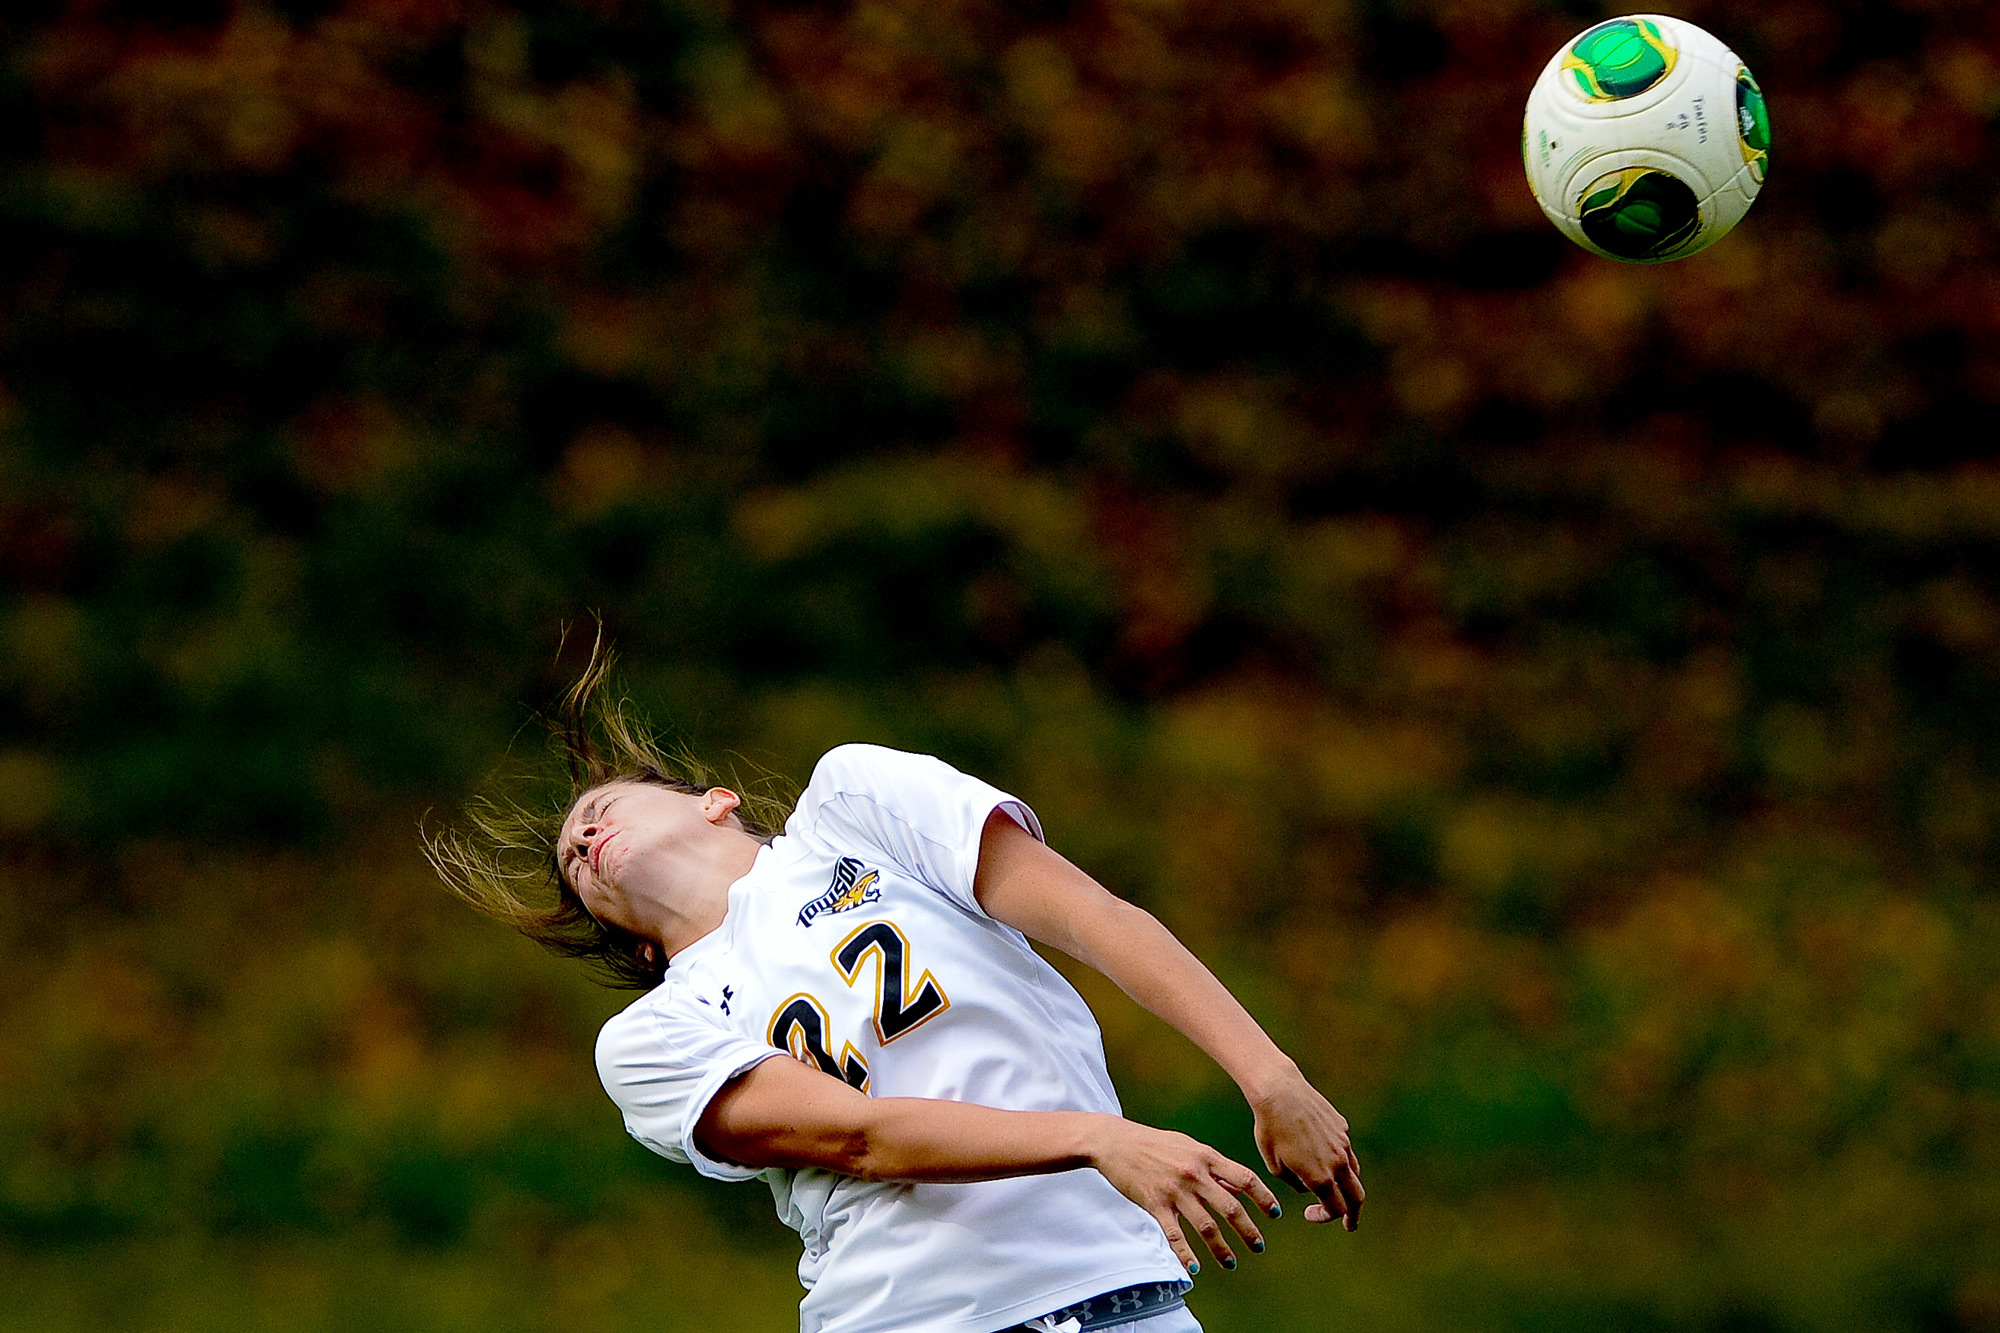  Towson University women's soccer defenseman Alex Evitts attempts a header during a 2-3 loss against Northeastern University on Oct. 17, 2013 in Baltimore, Md. 